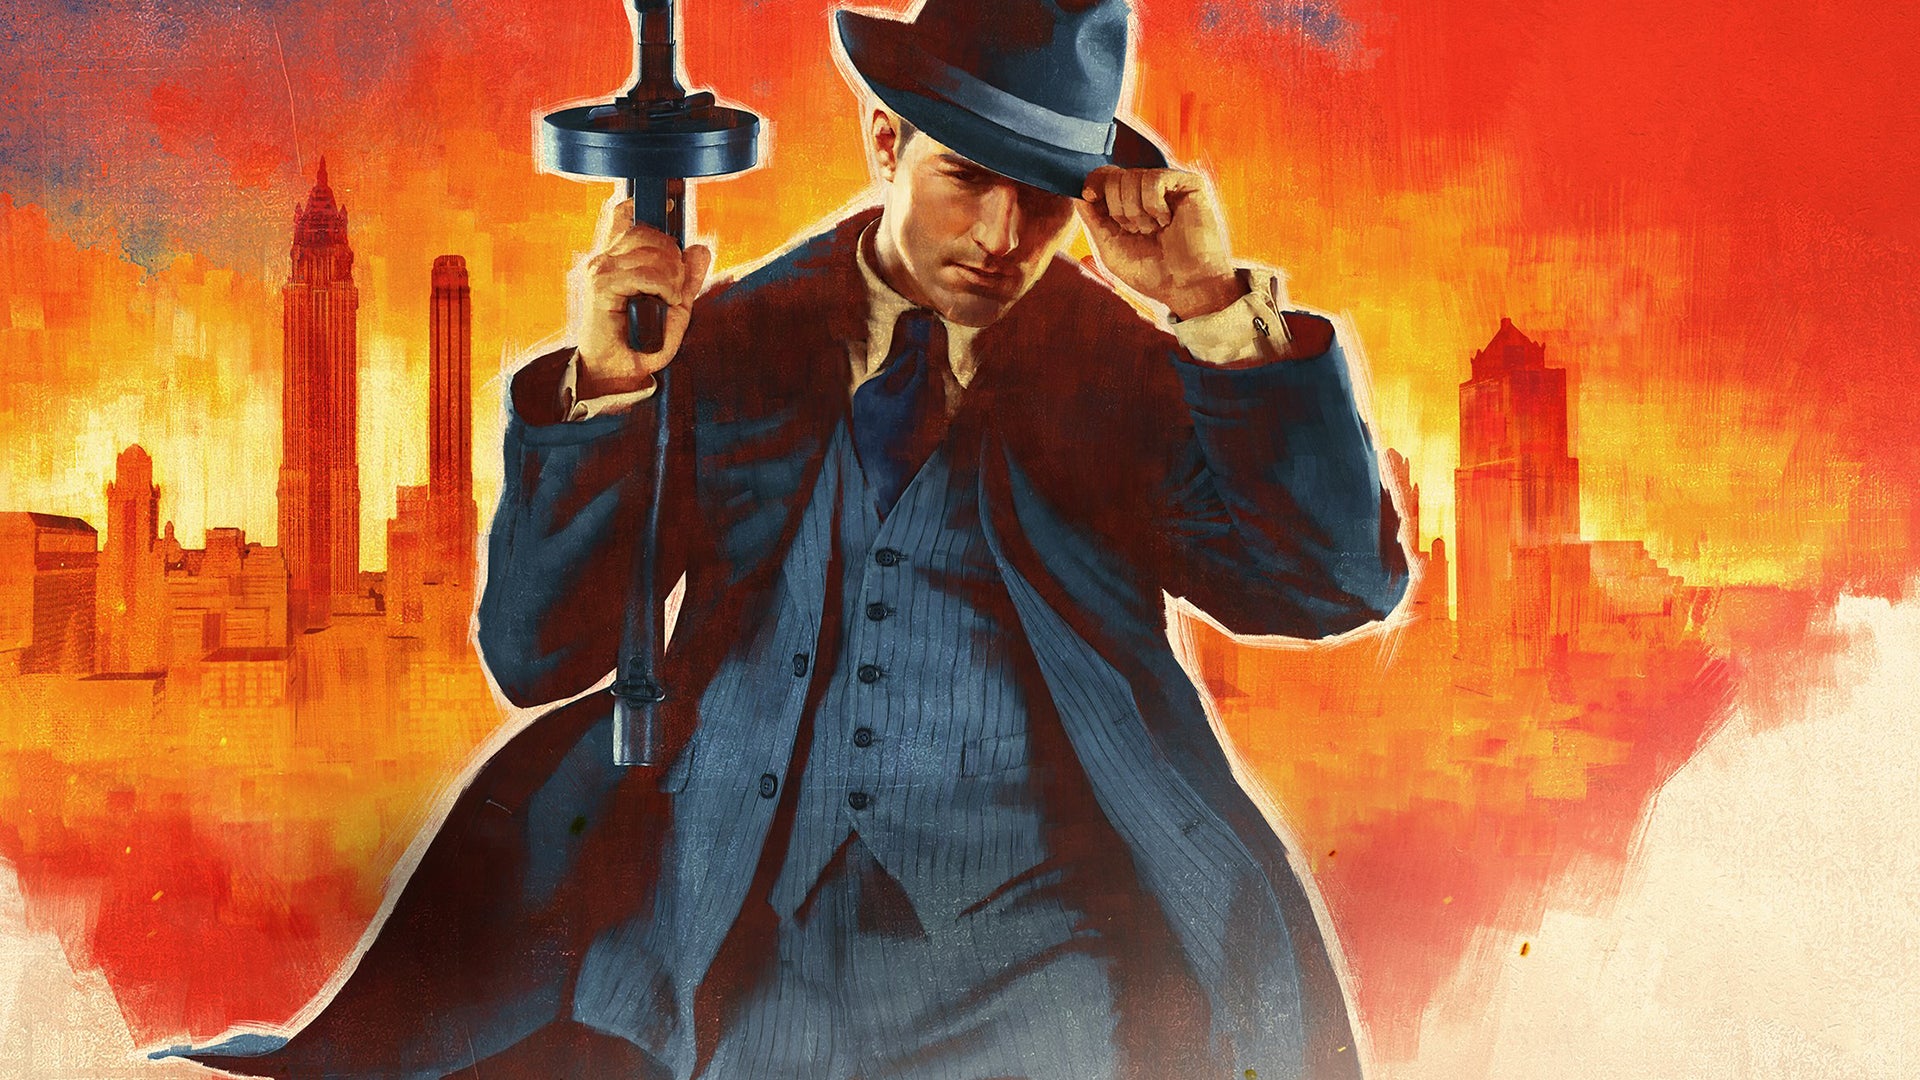 Image for Mafia Definitive Edition: Every Console Tested - Impressive Tech That Sets The Stage For Next-Gen